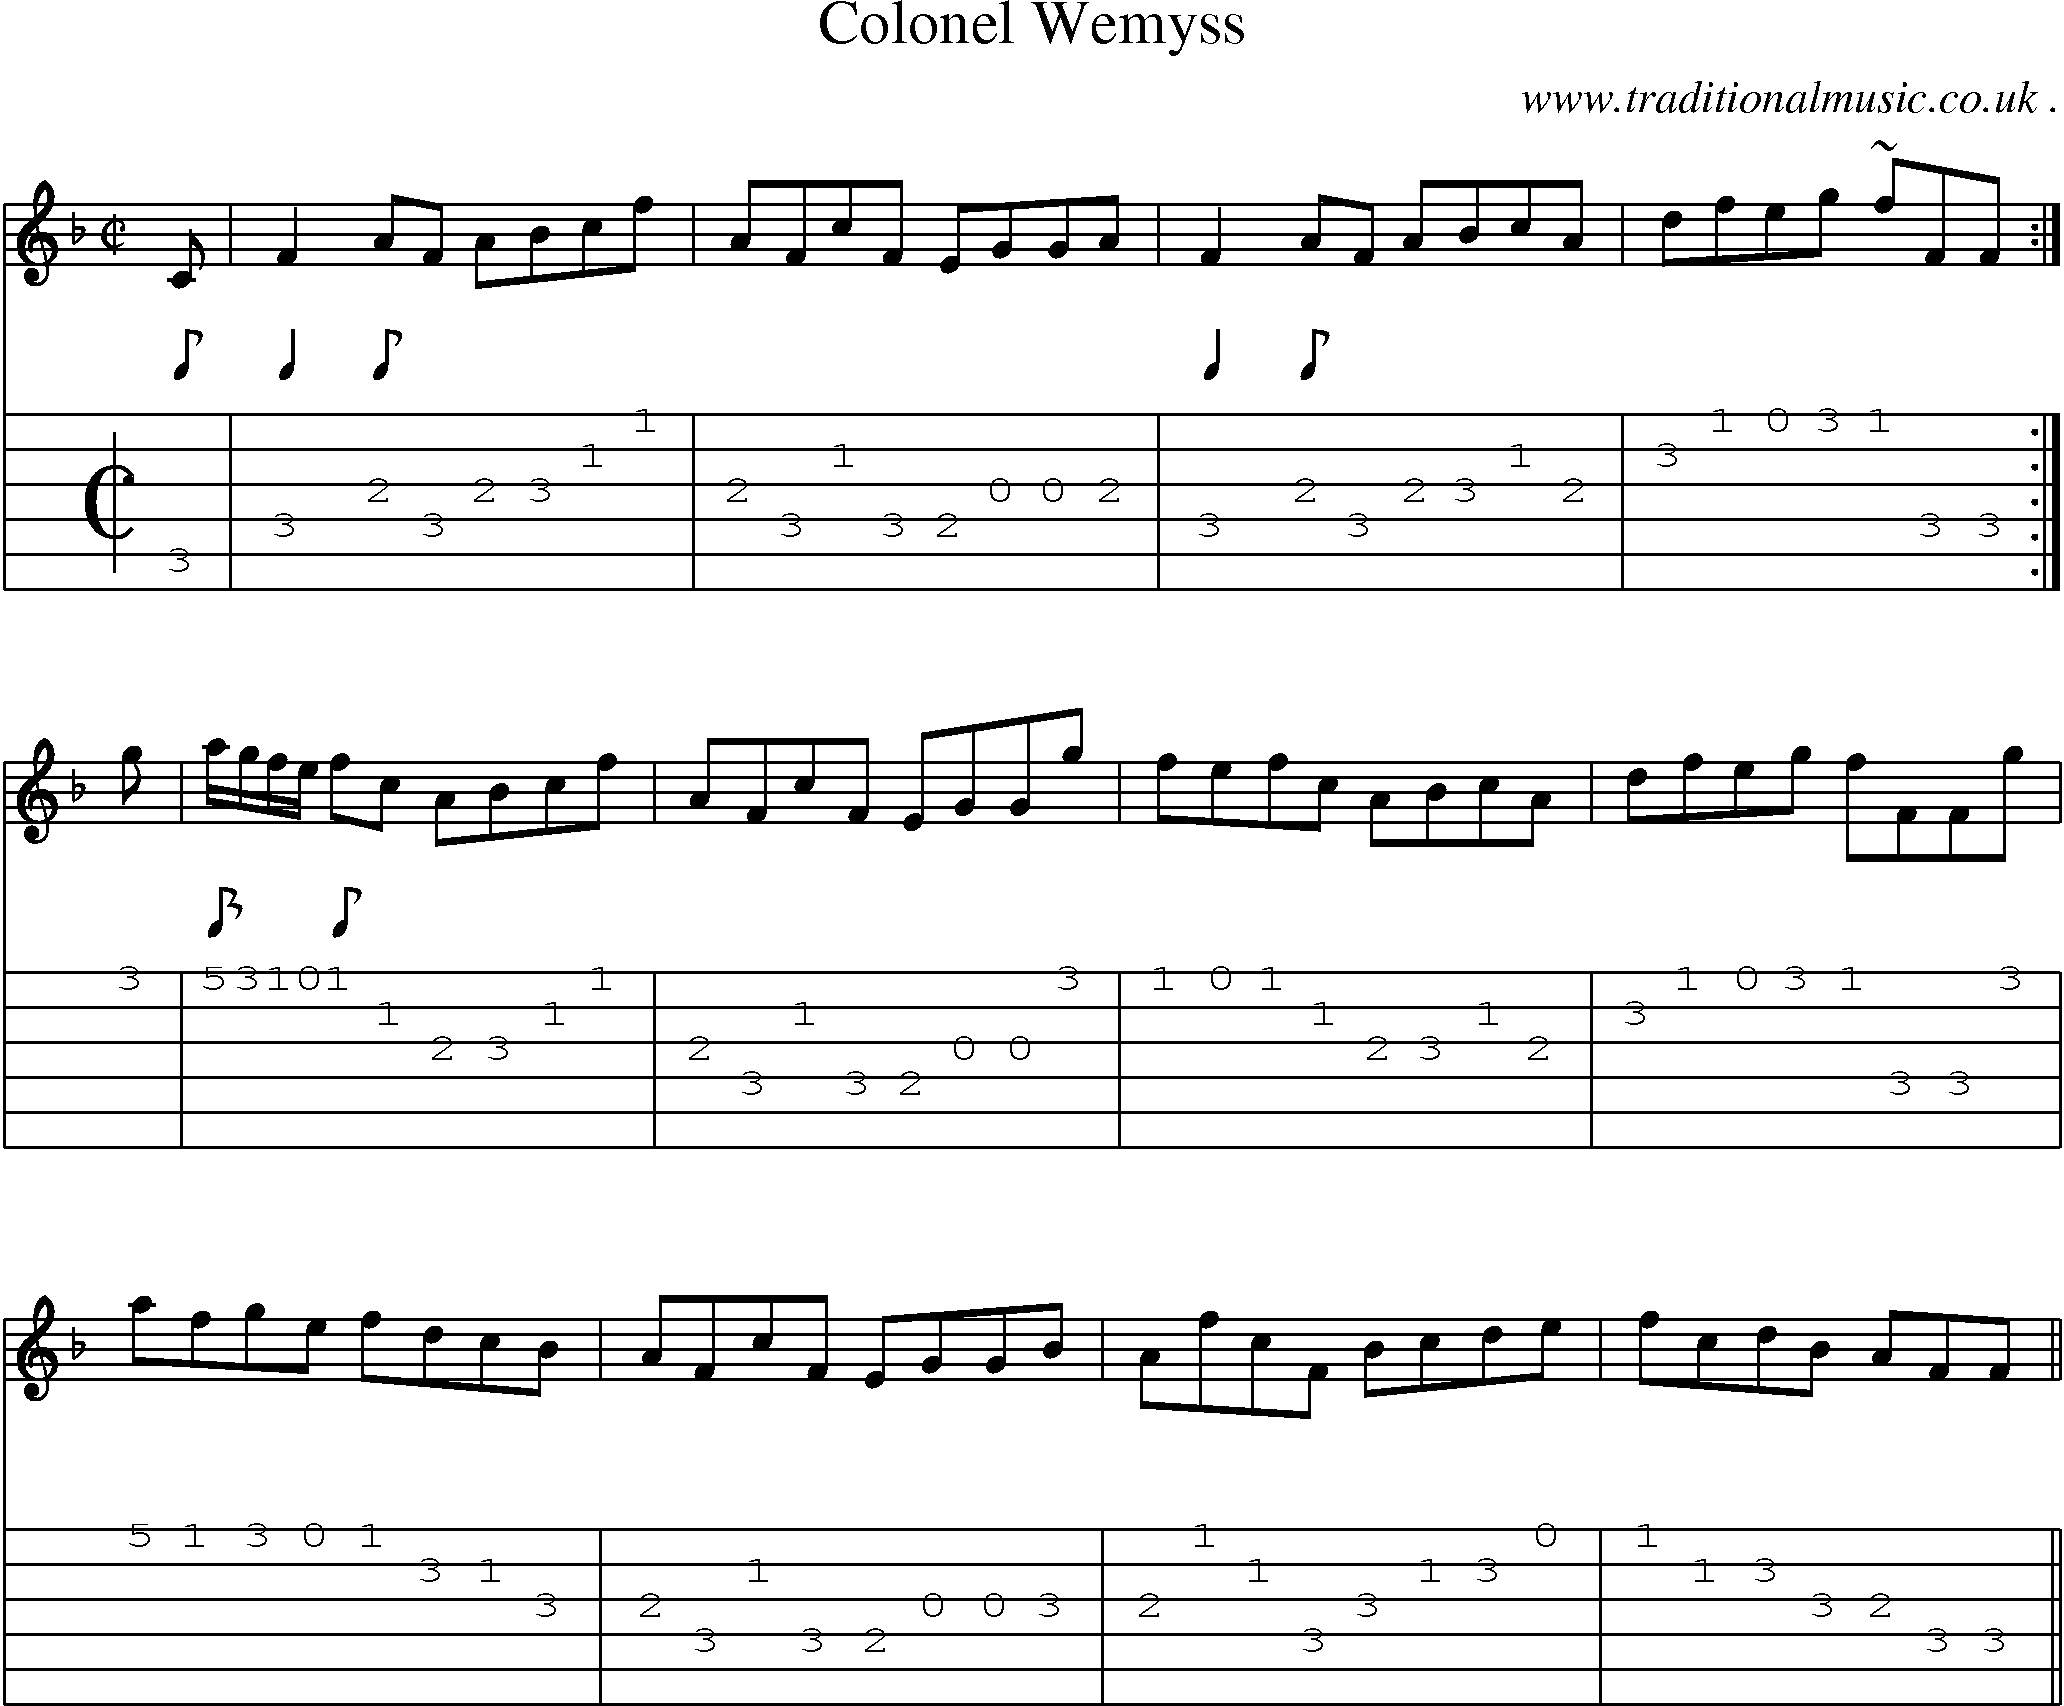 Sheet-music  score, Chords and Guitar Tabs for Colonel Wemyss